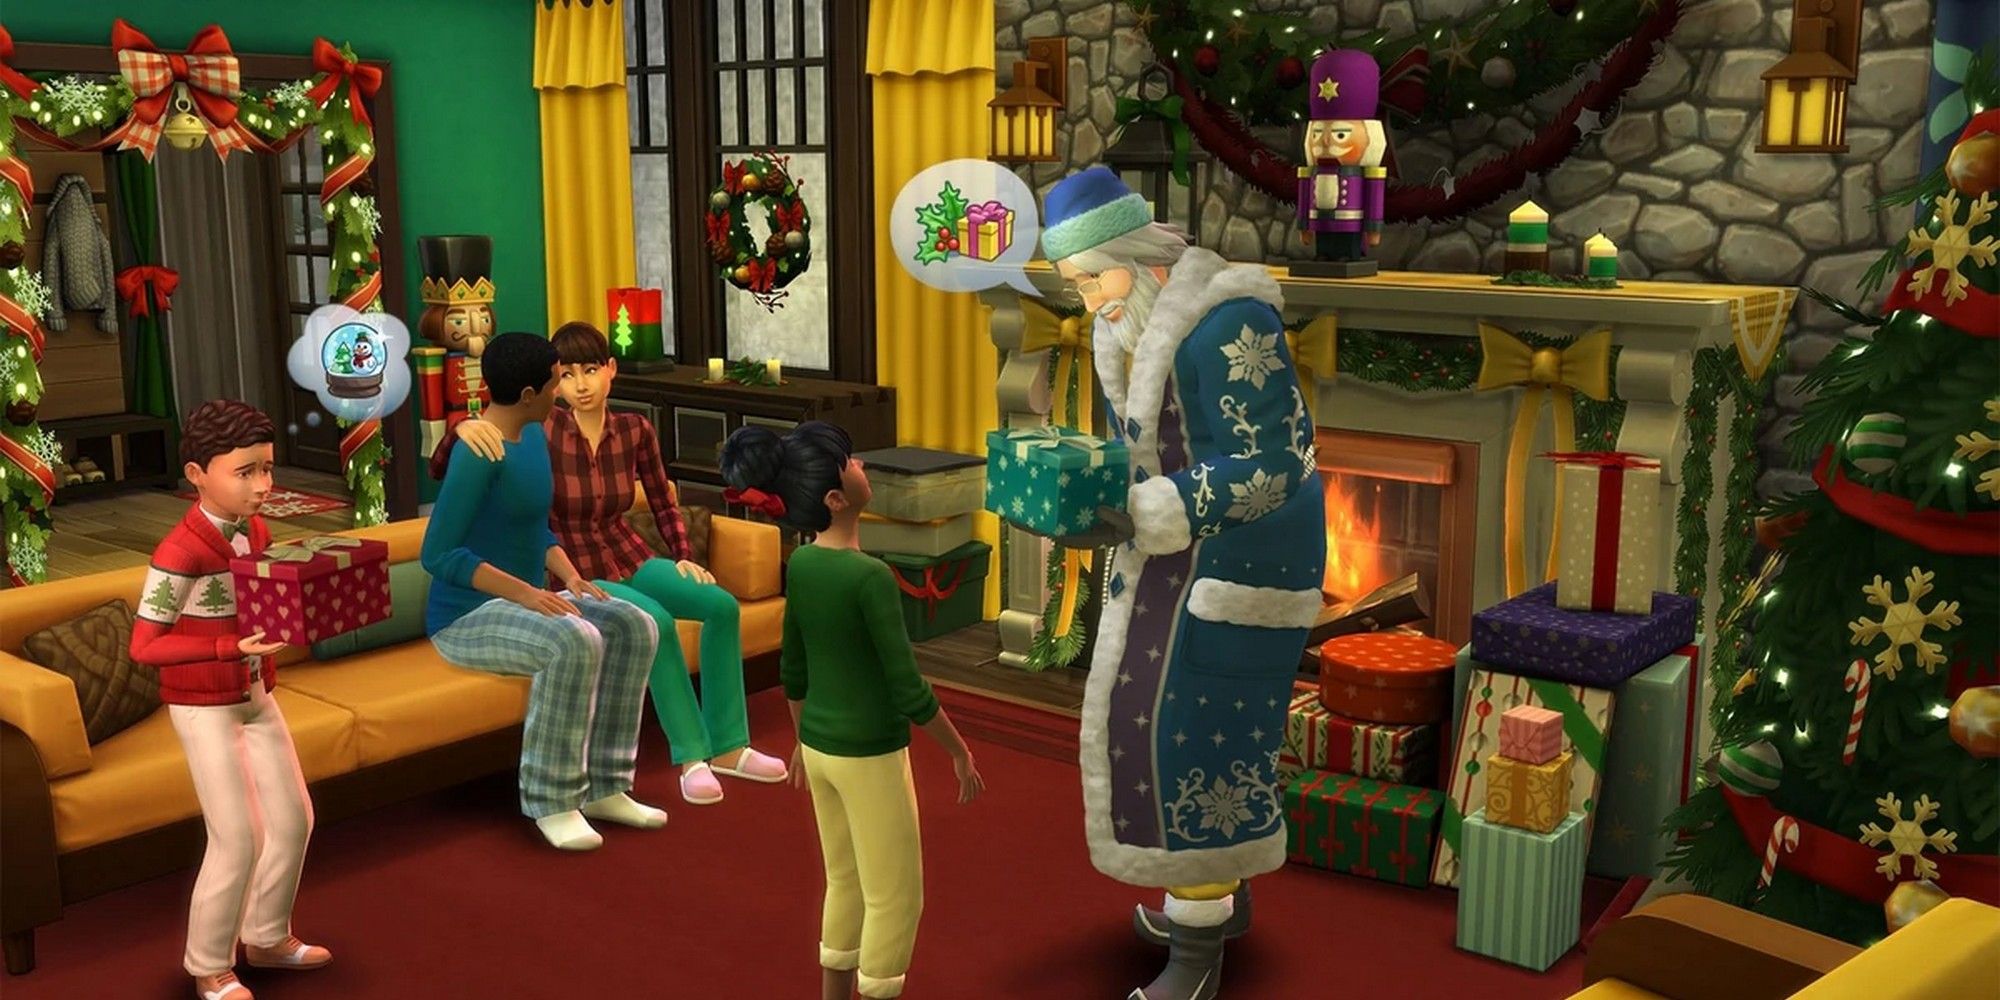 What Do Each Of The Gnomes Want In The Sims 4: Seasons?